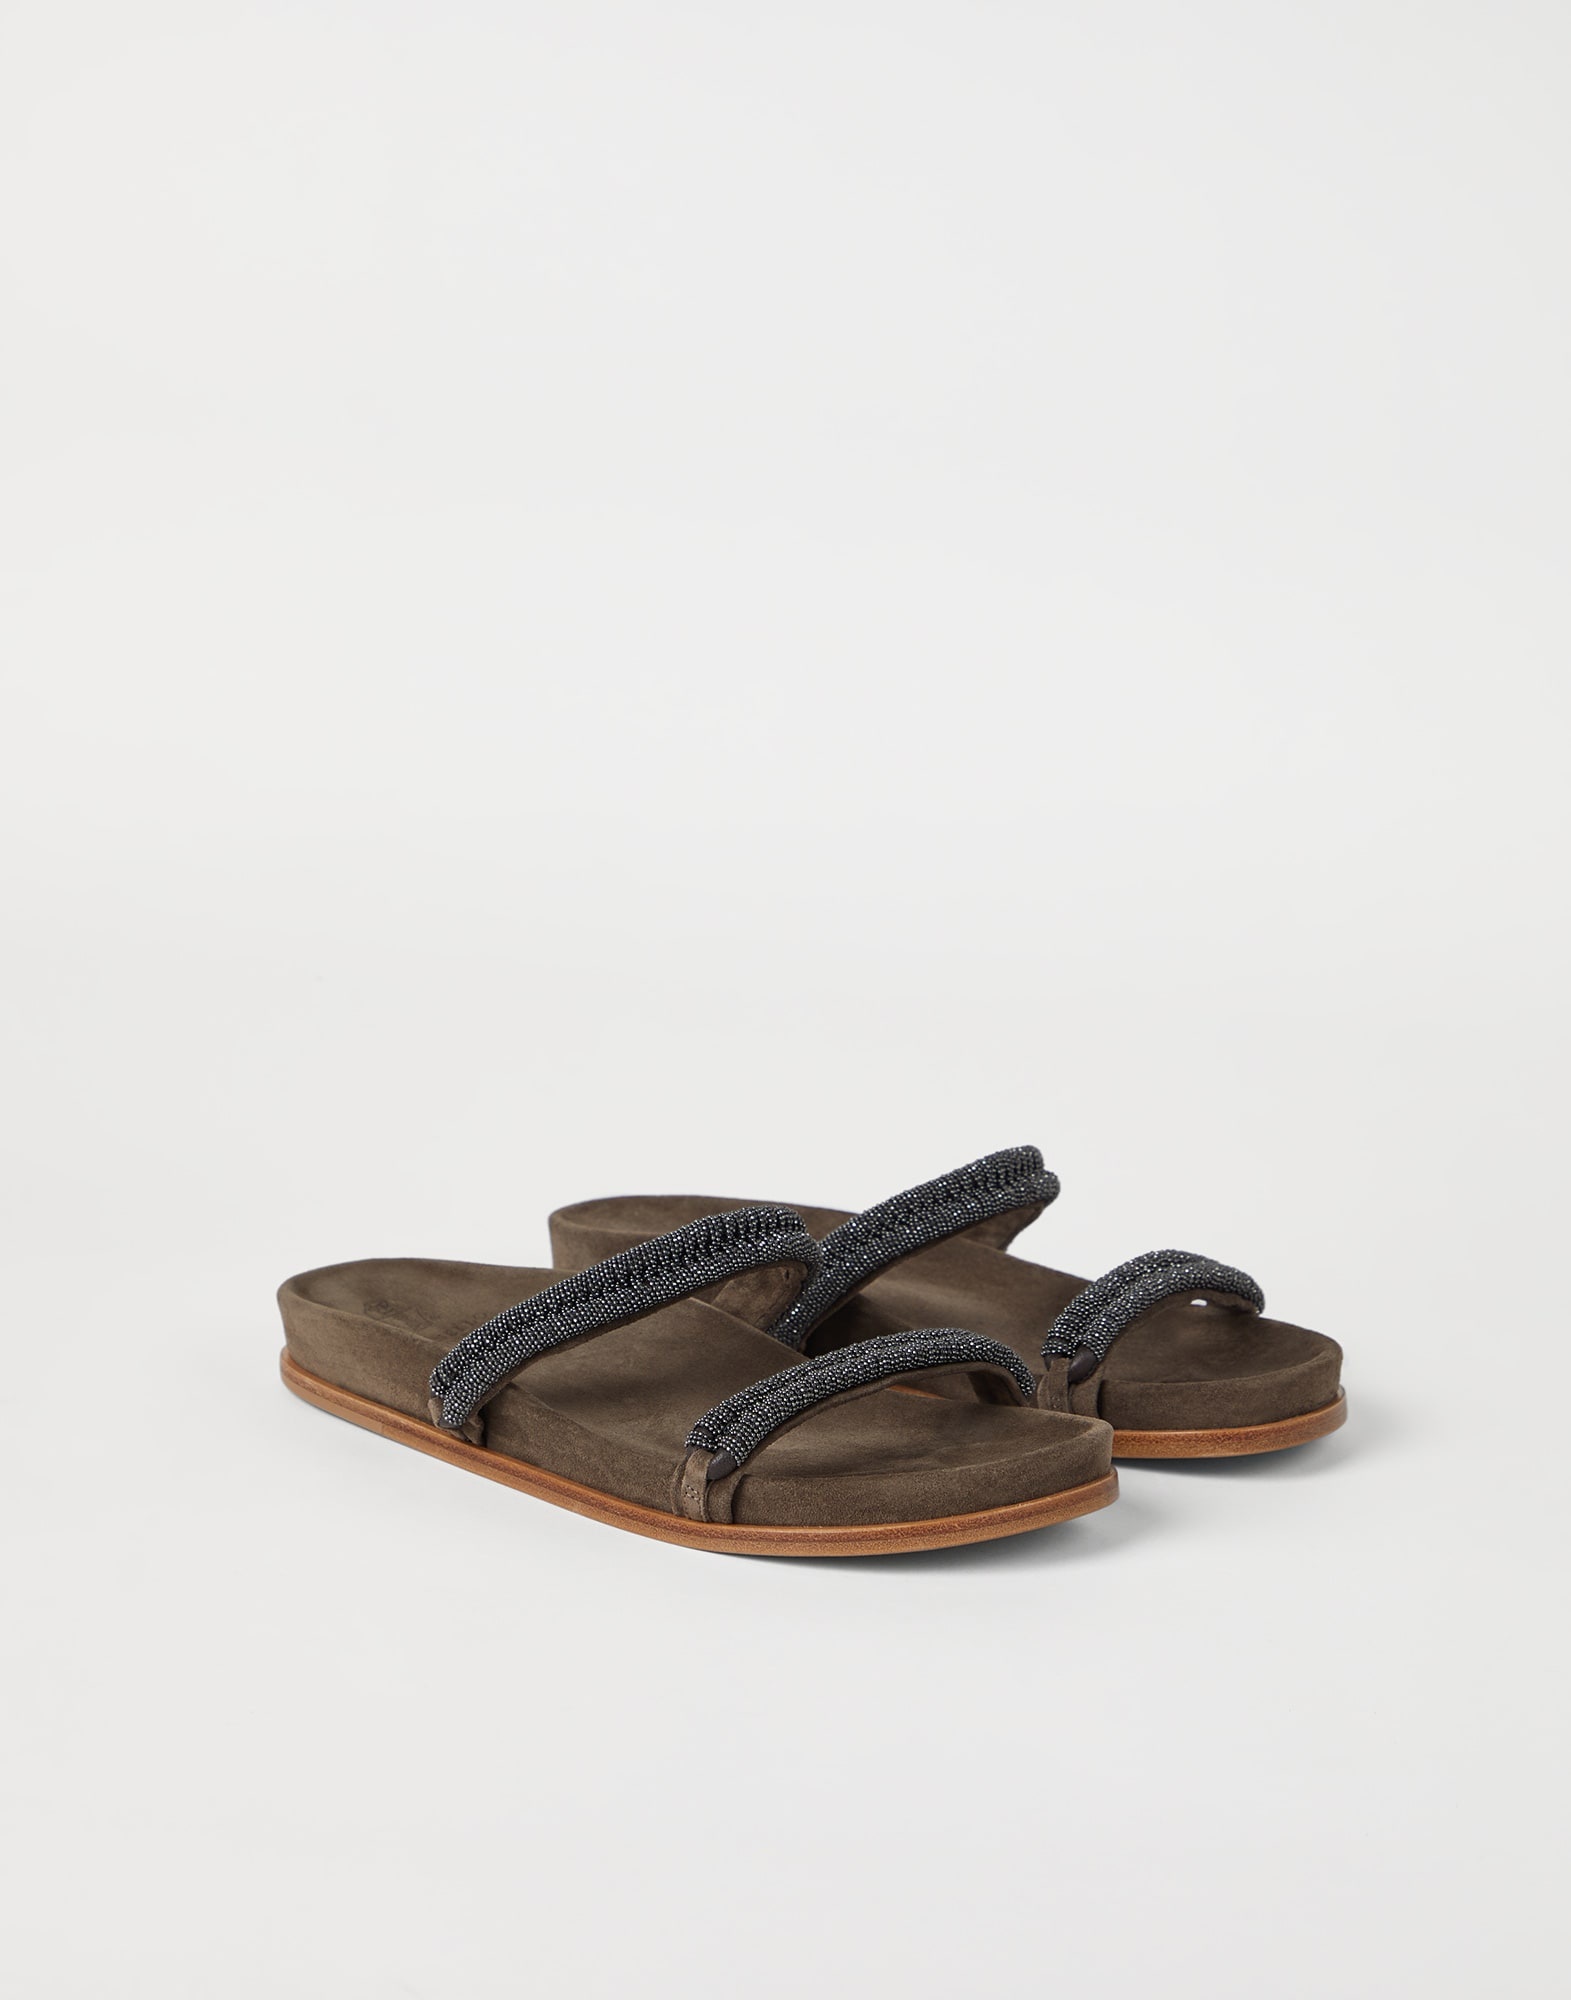 Suede slides with precious braided straps - 1